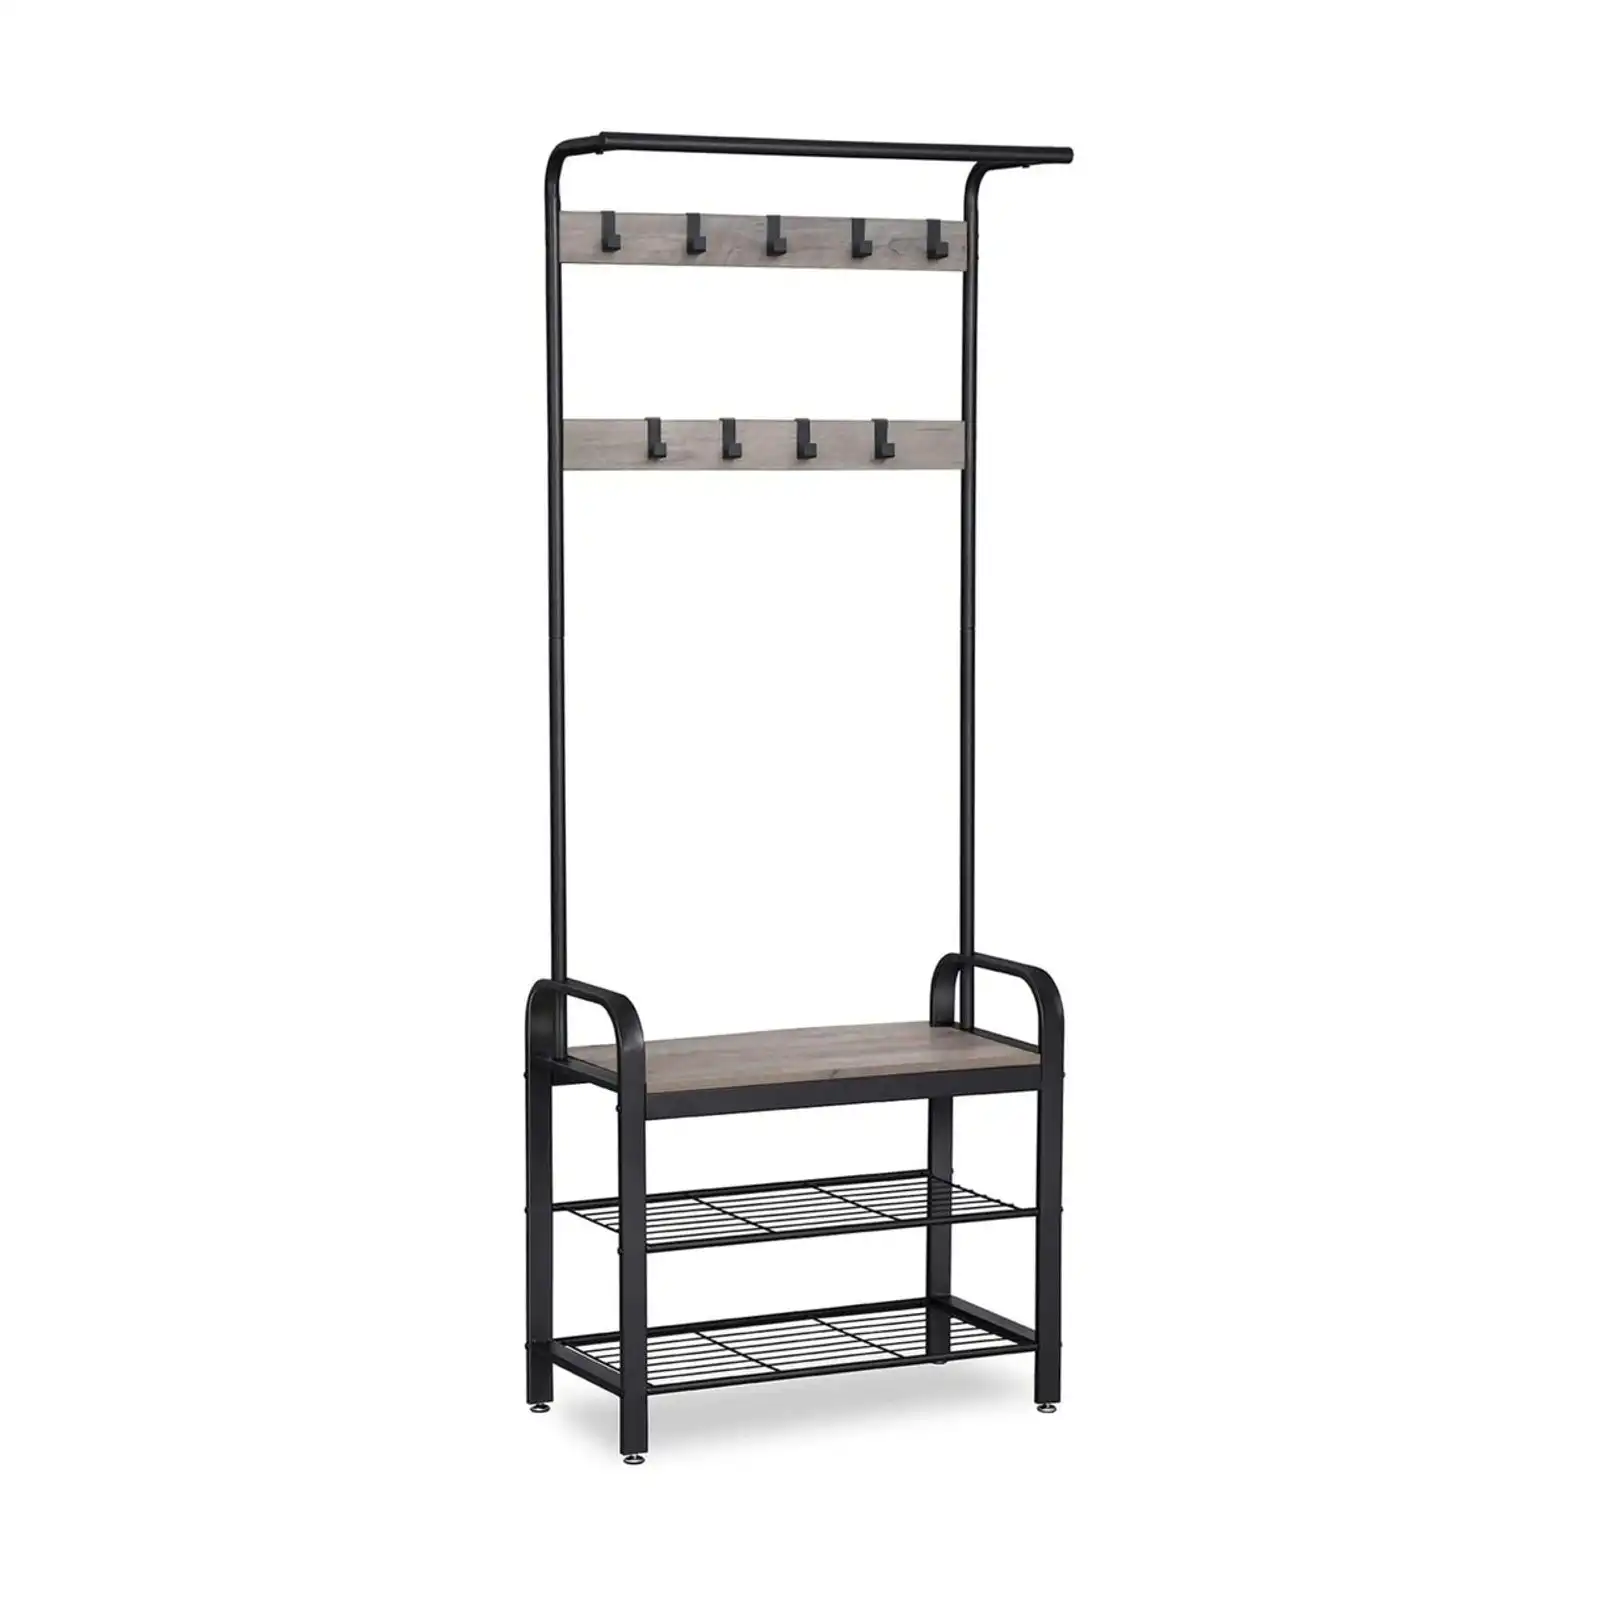 VASAGLE Greige and Black Coat Rack Stand with Bench 183cm